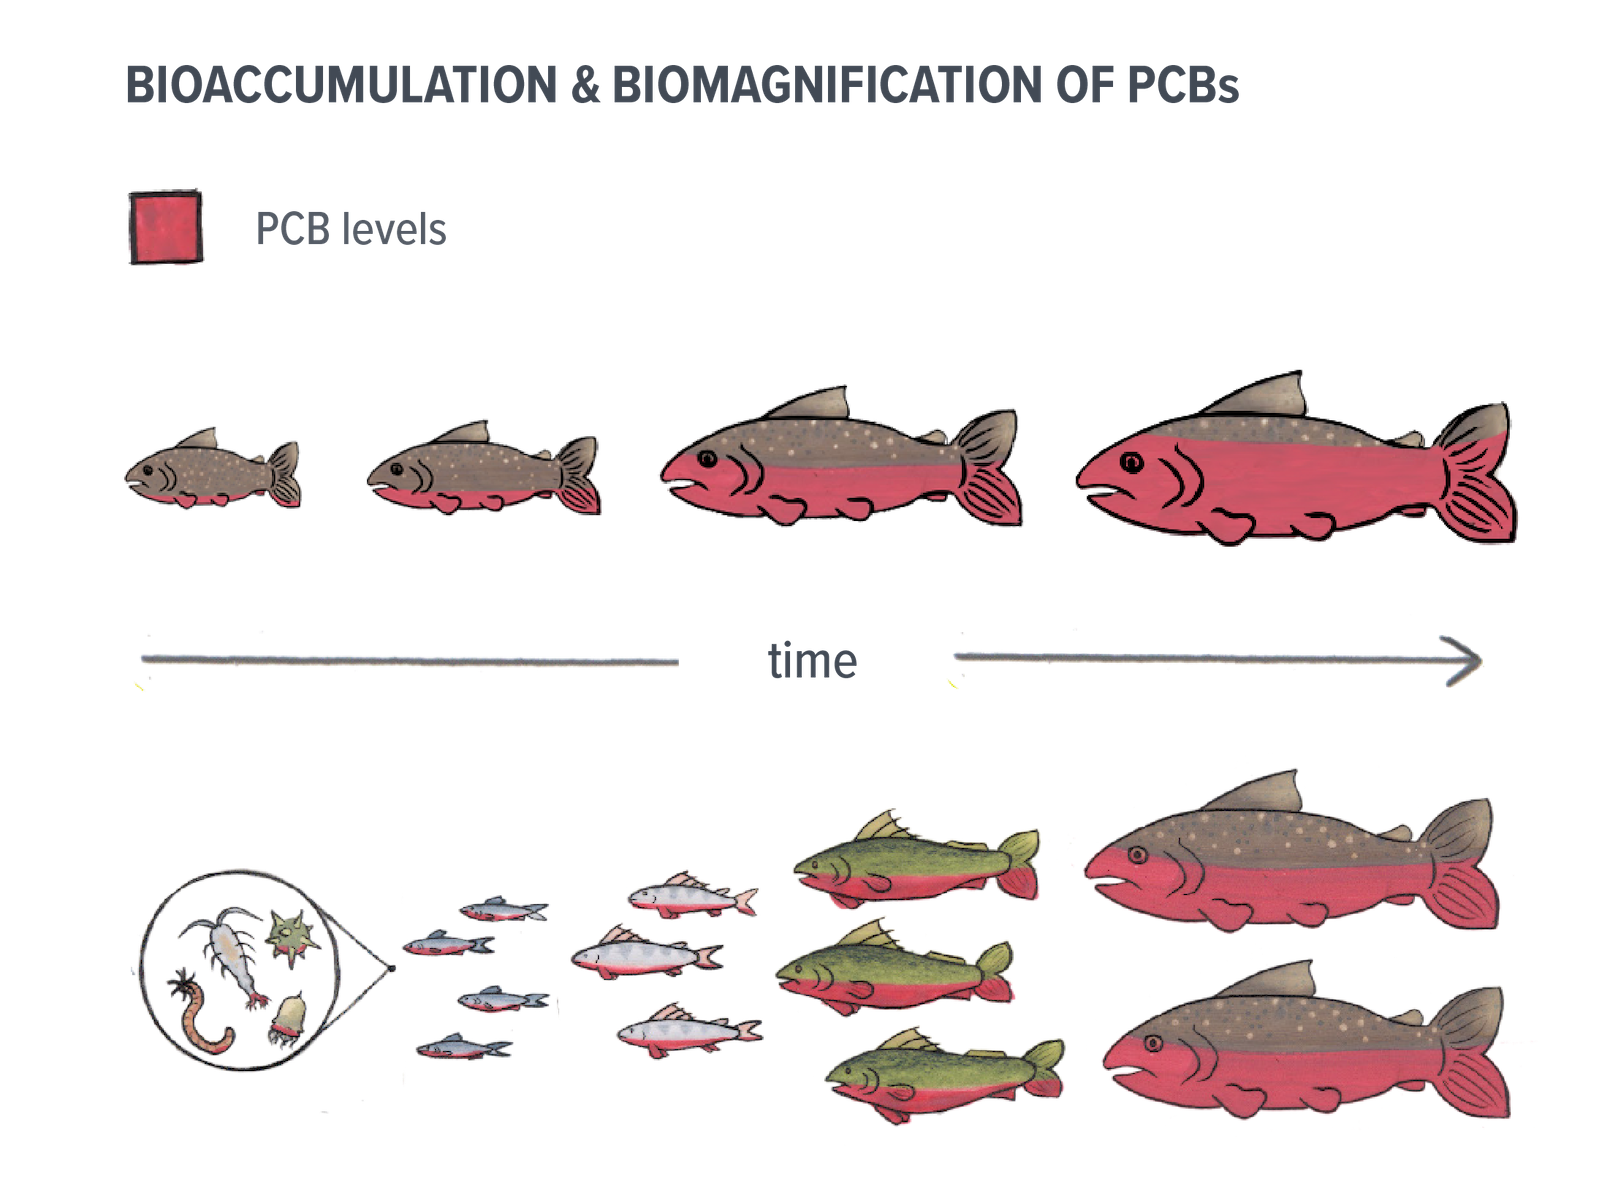 Hand drawn image showing increasing PCB levels in fish over time through bioaccumulation and biomagnification.